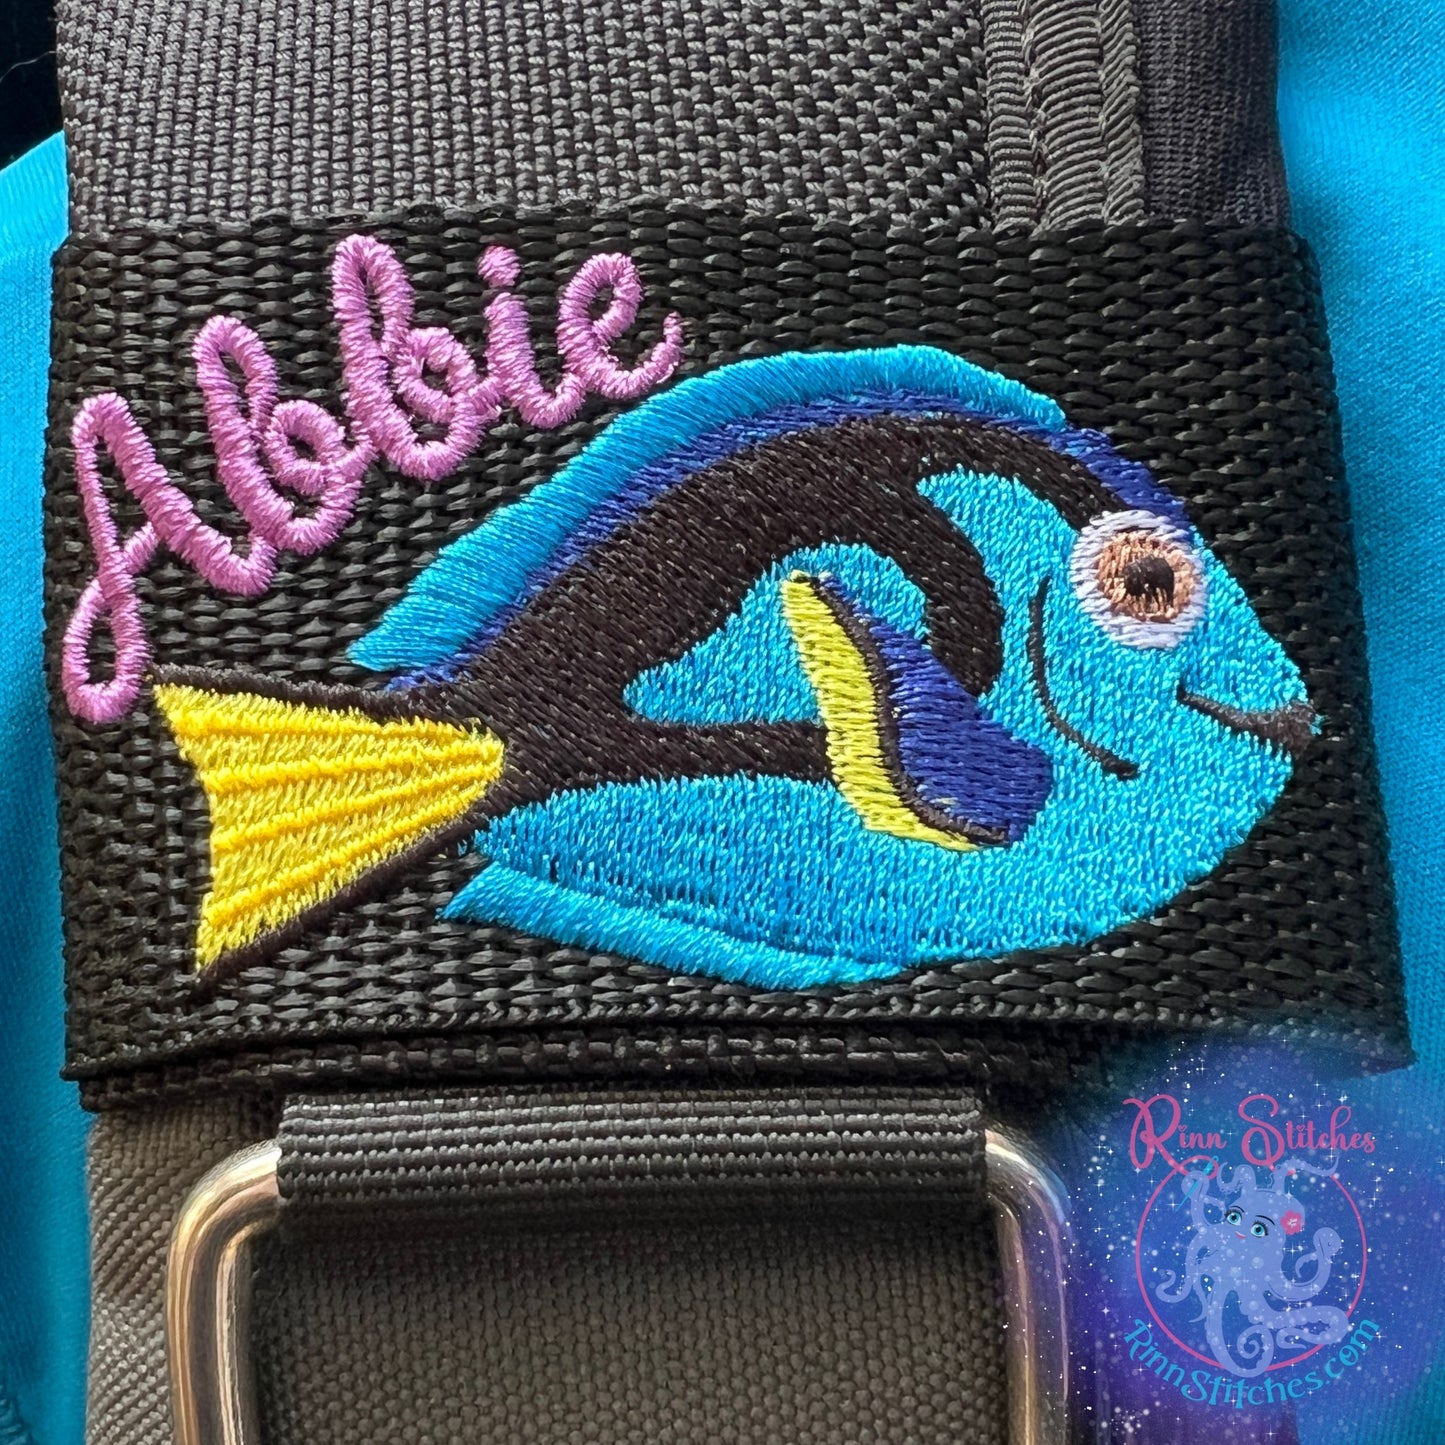 Blue Tang Tropical Fish Personalized & Customizable Scuba Diver BCD Identification Tag by Rinn Stitches on Maui, Hawaii